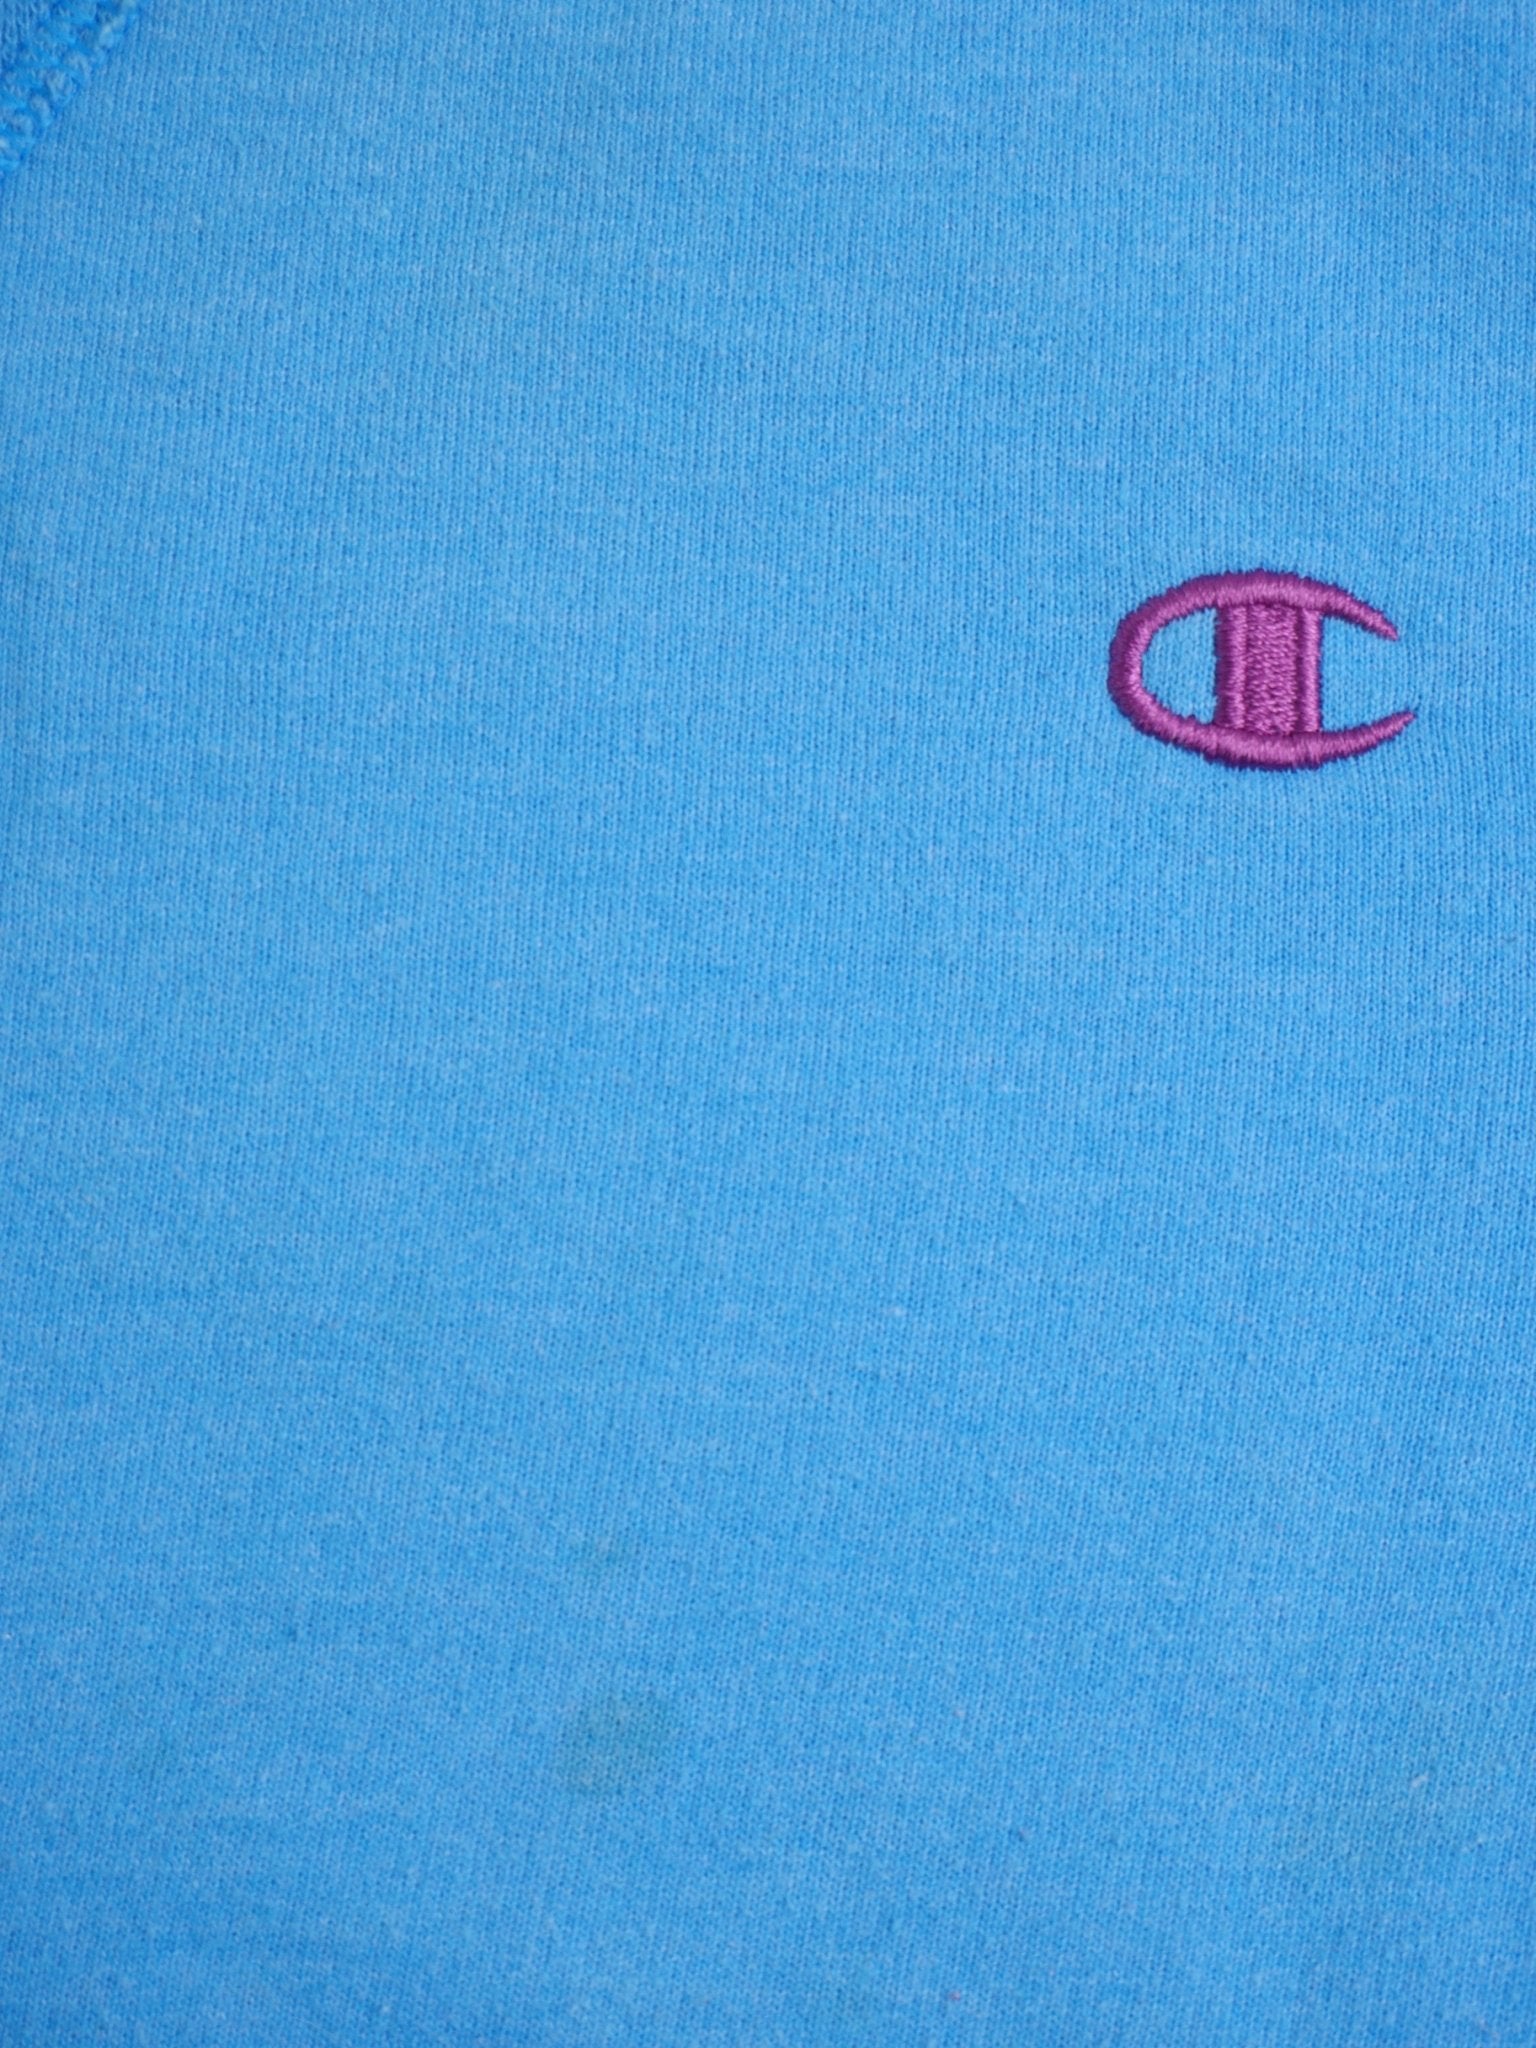 Champion embroidered Logo Vintage Sweater - Peeces